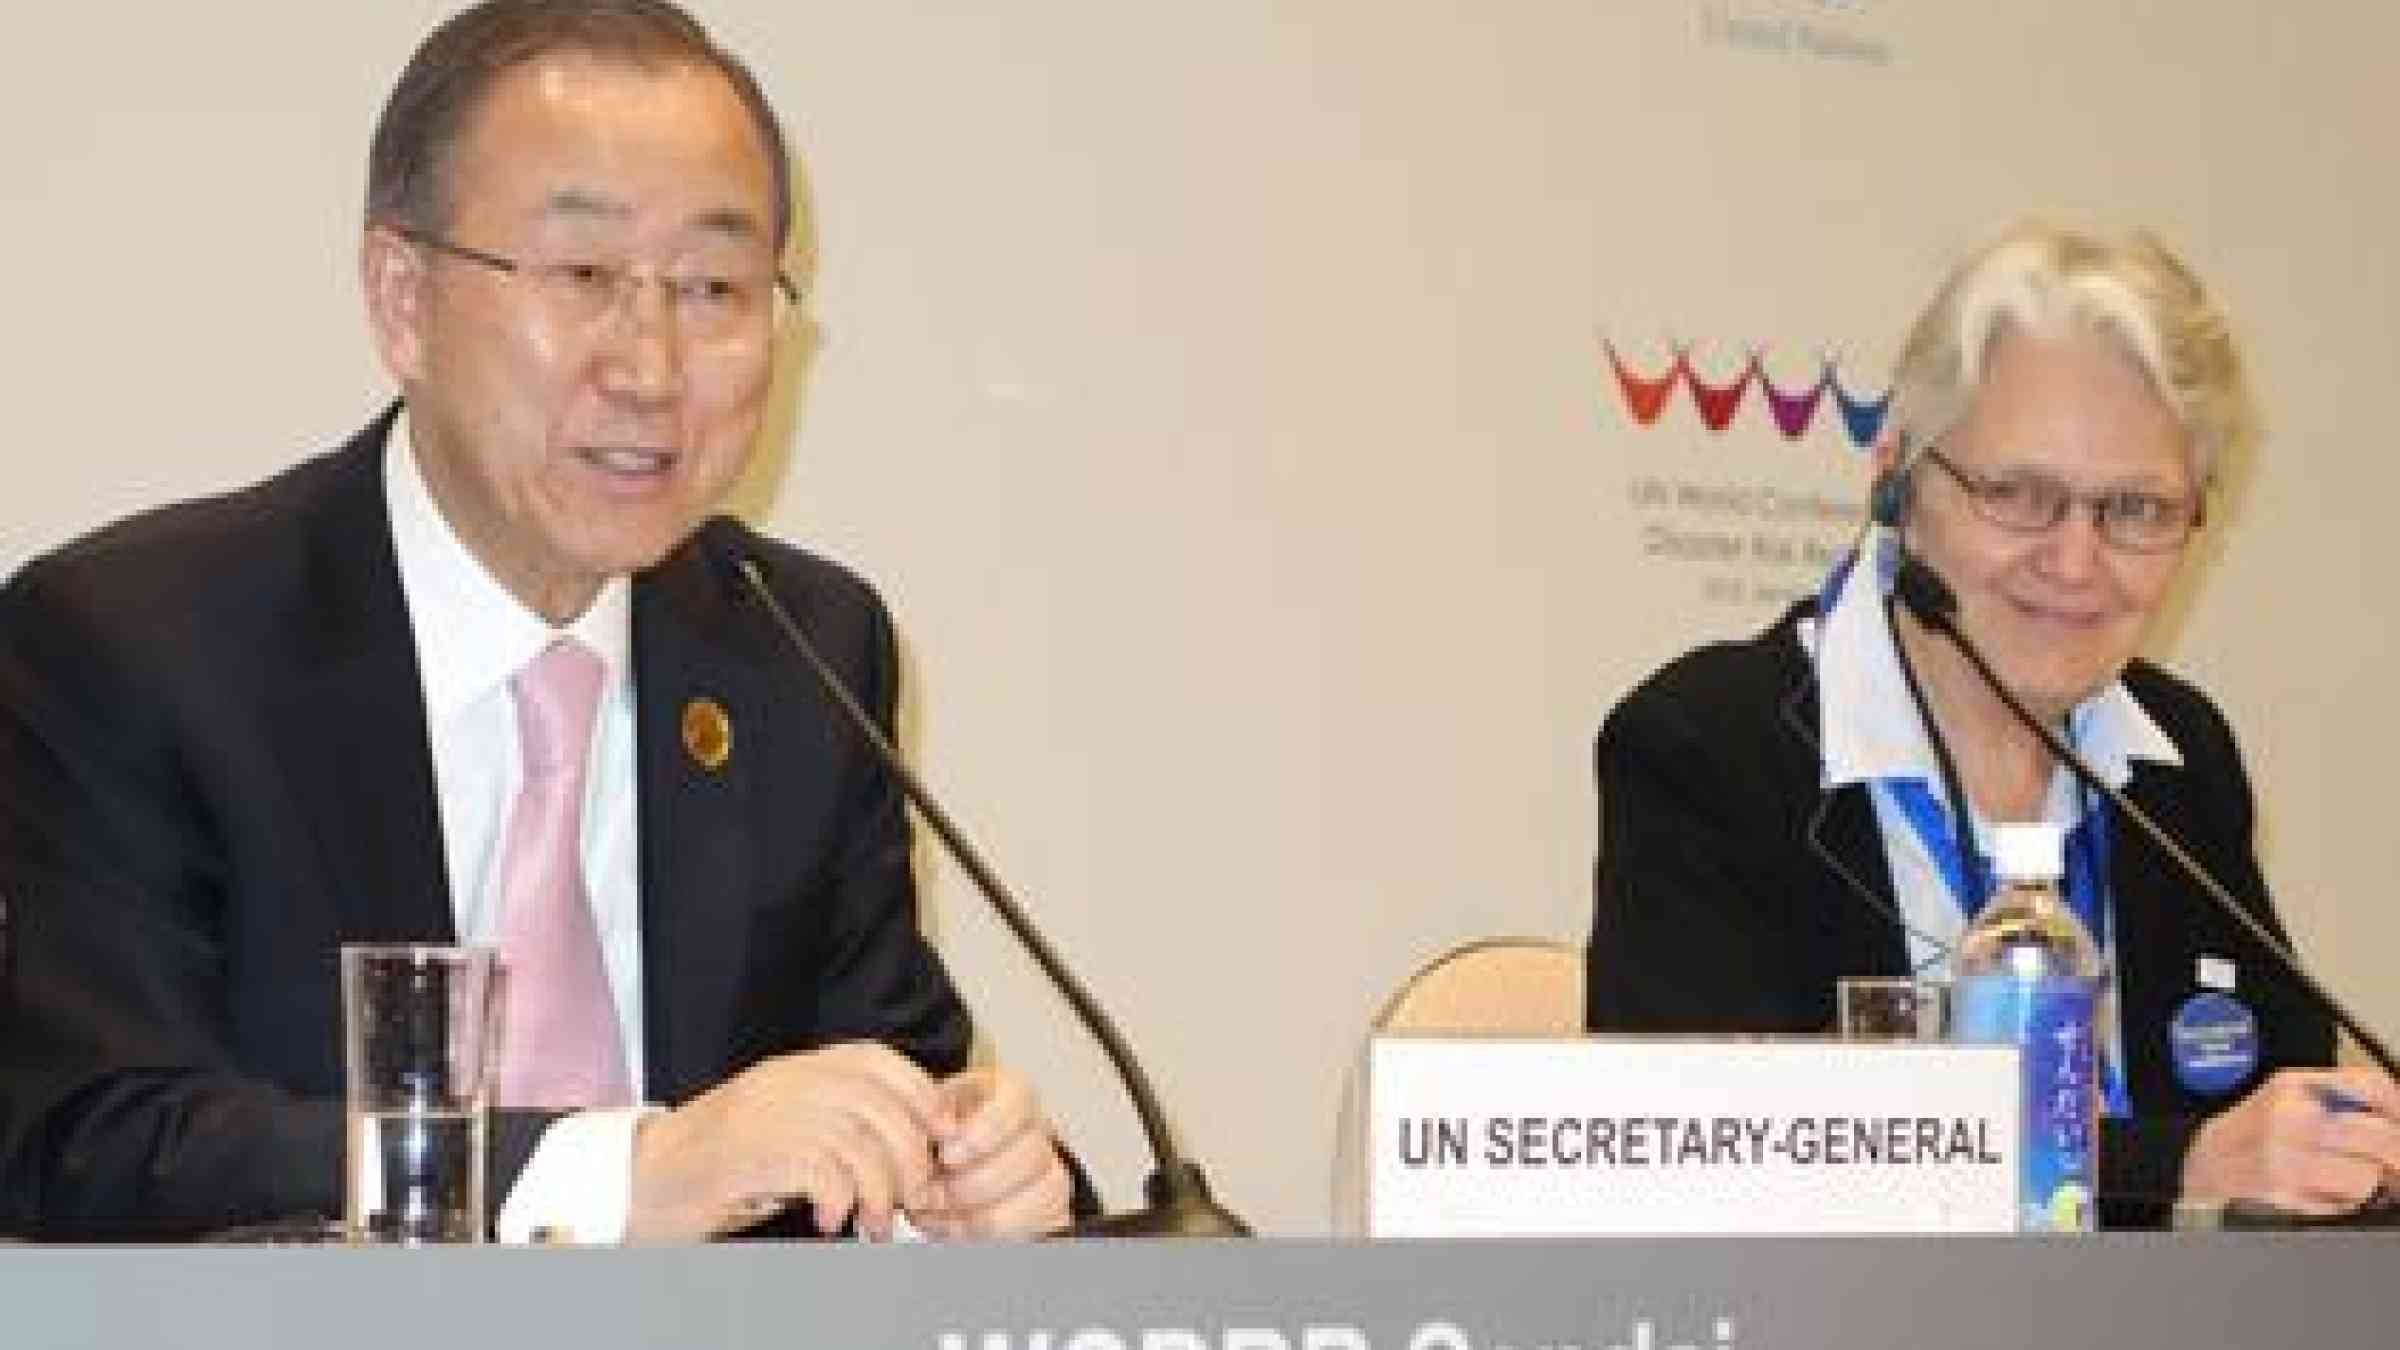 Speaking at a press conference, the UN Secretary-General, Ban Ki-moon, said: “Our thoughts are with all disaster victims. Our best possible tribute will be to make this Conference a success.” (Photo: UNISDR)